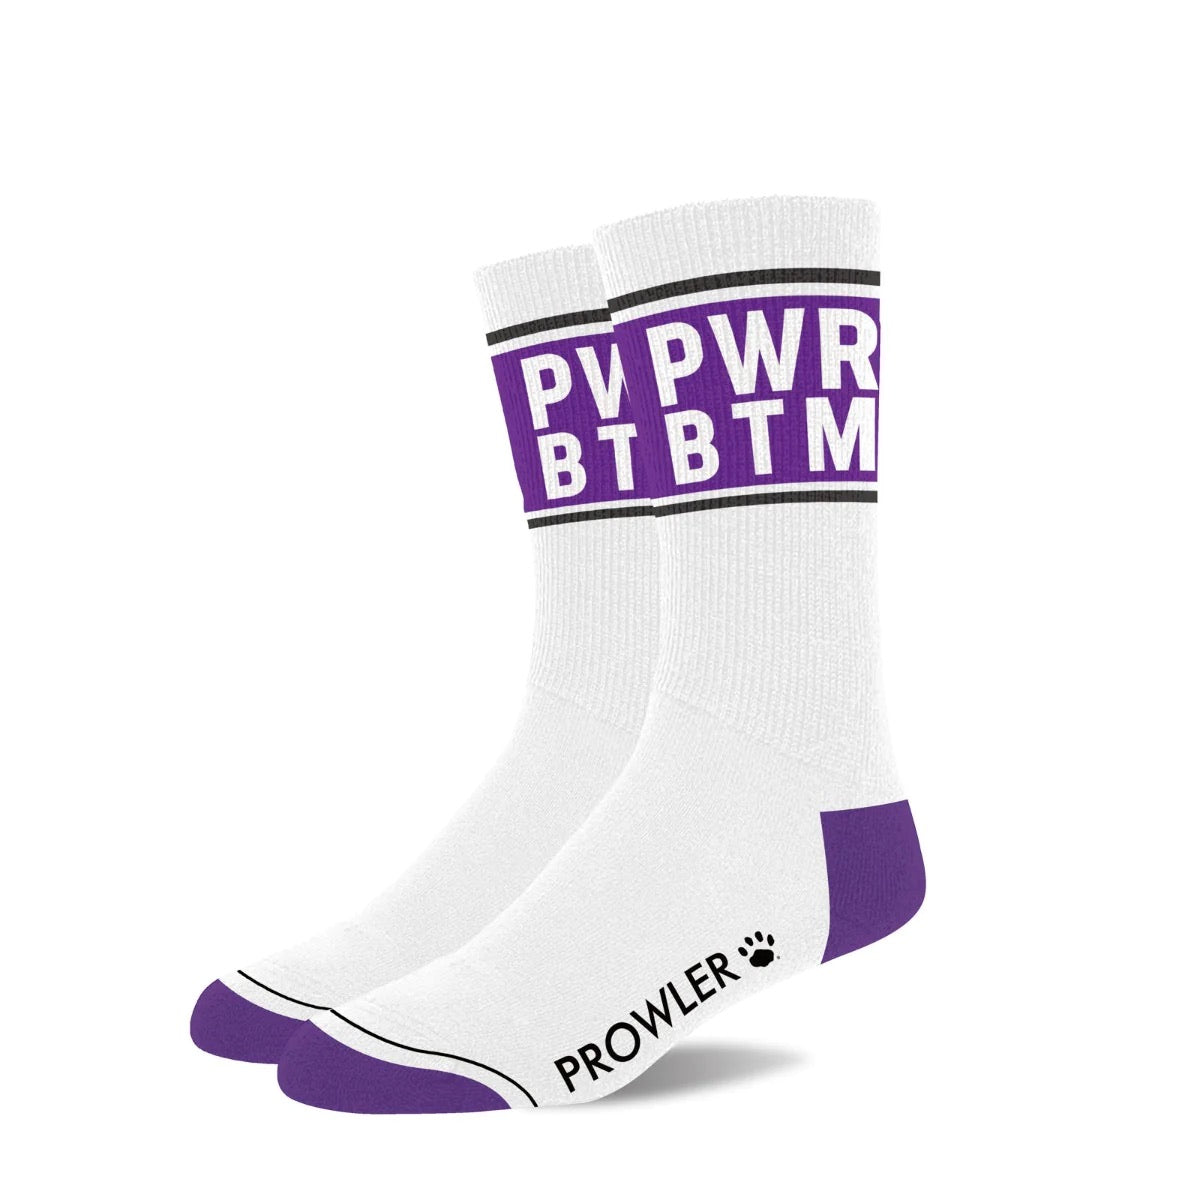 A pair of White & Purple "PWR BTM" Prowler Text Socks.